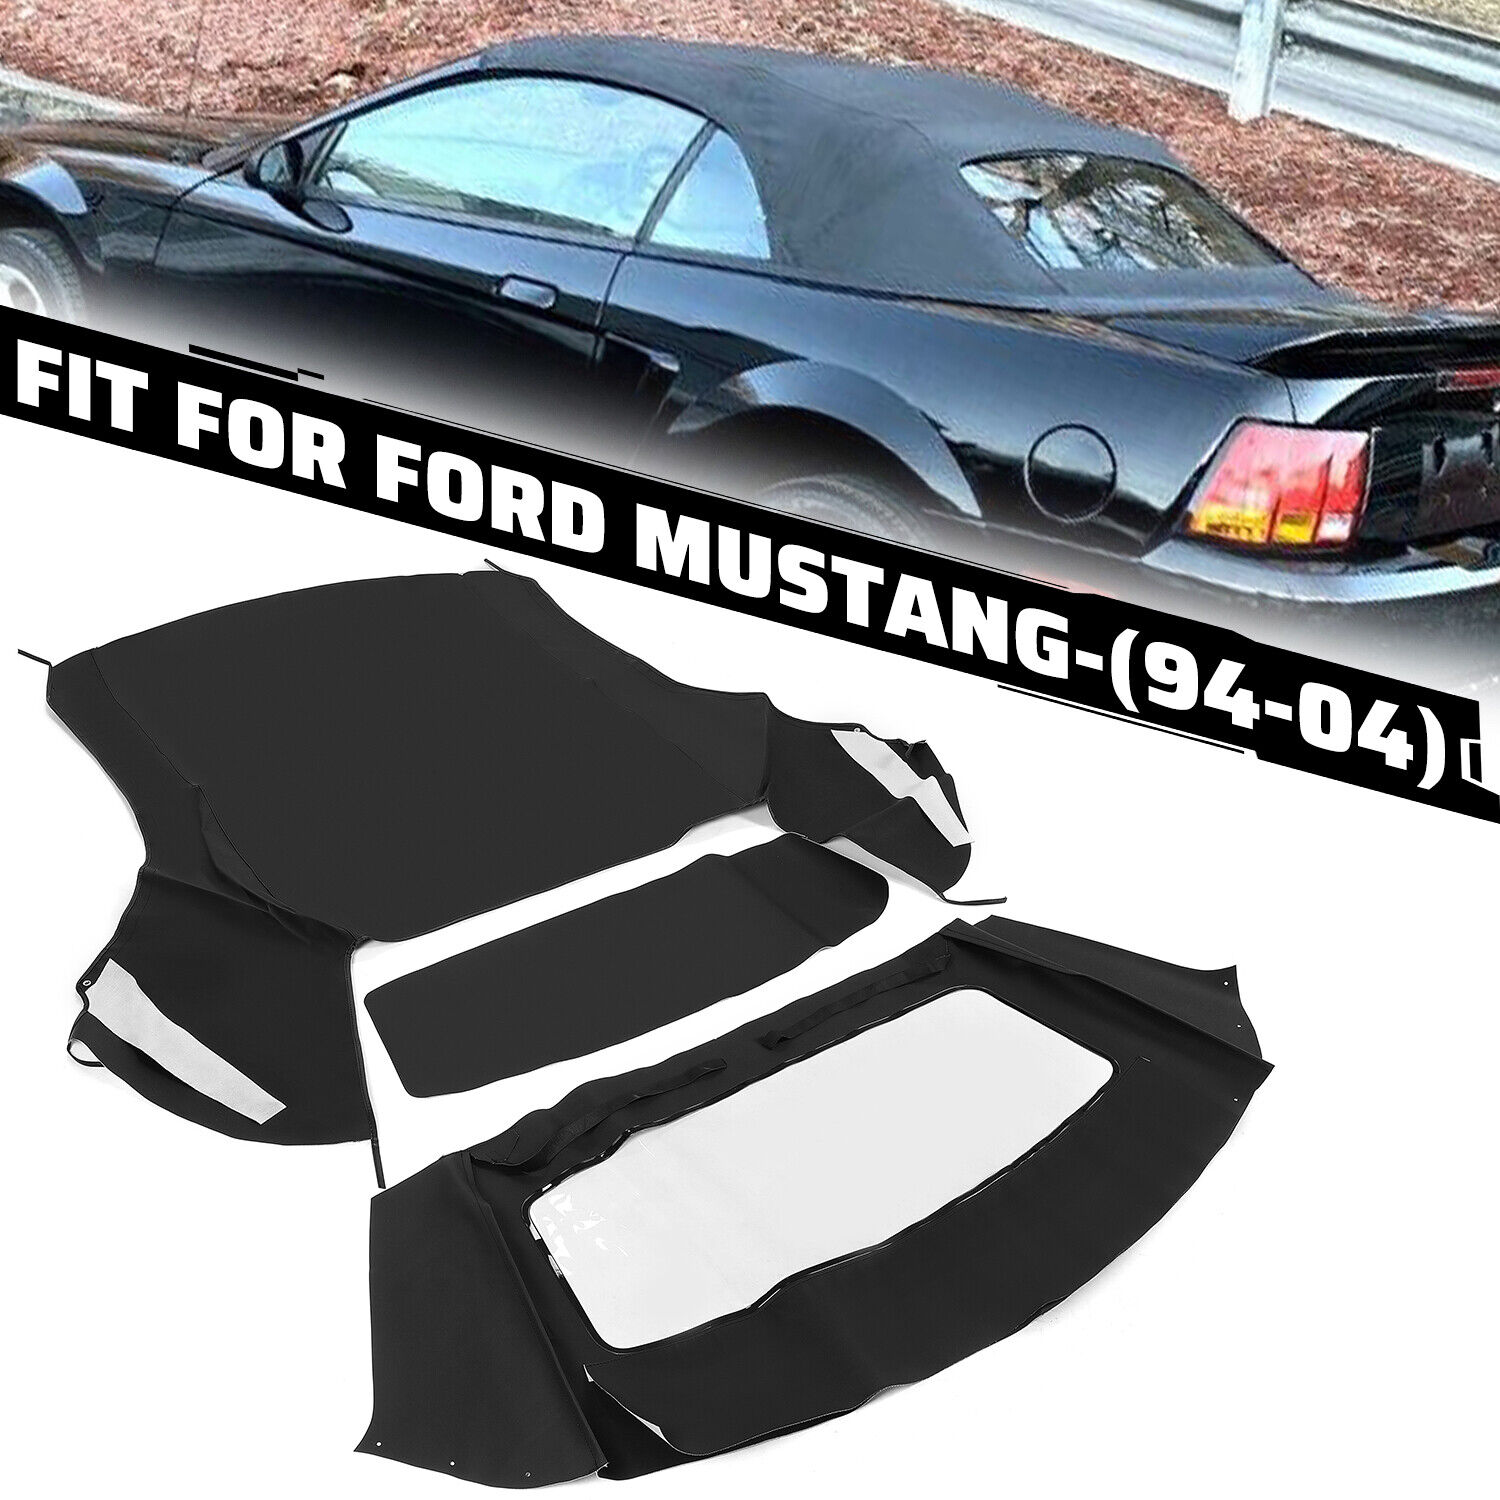 For Ford mustang Convertible 1994-04 Soft top W/window Black Sailcloth FM3229SS